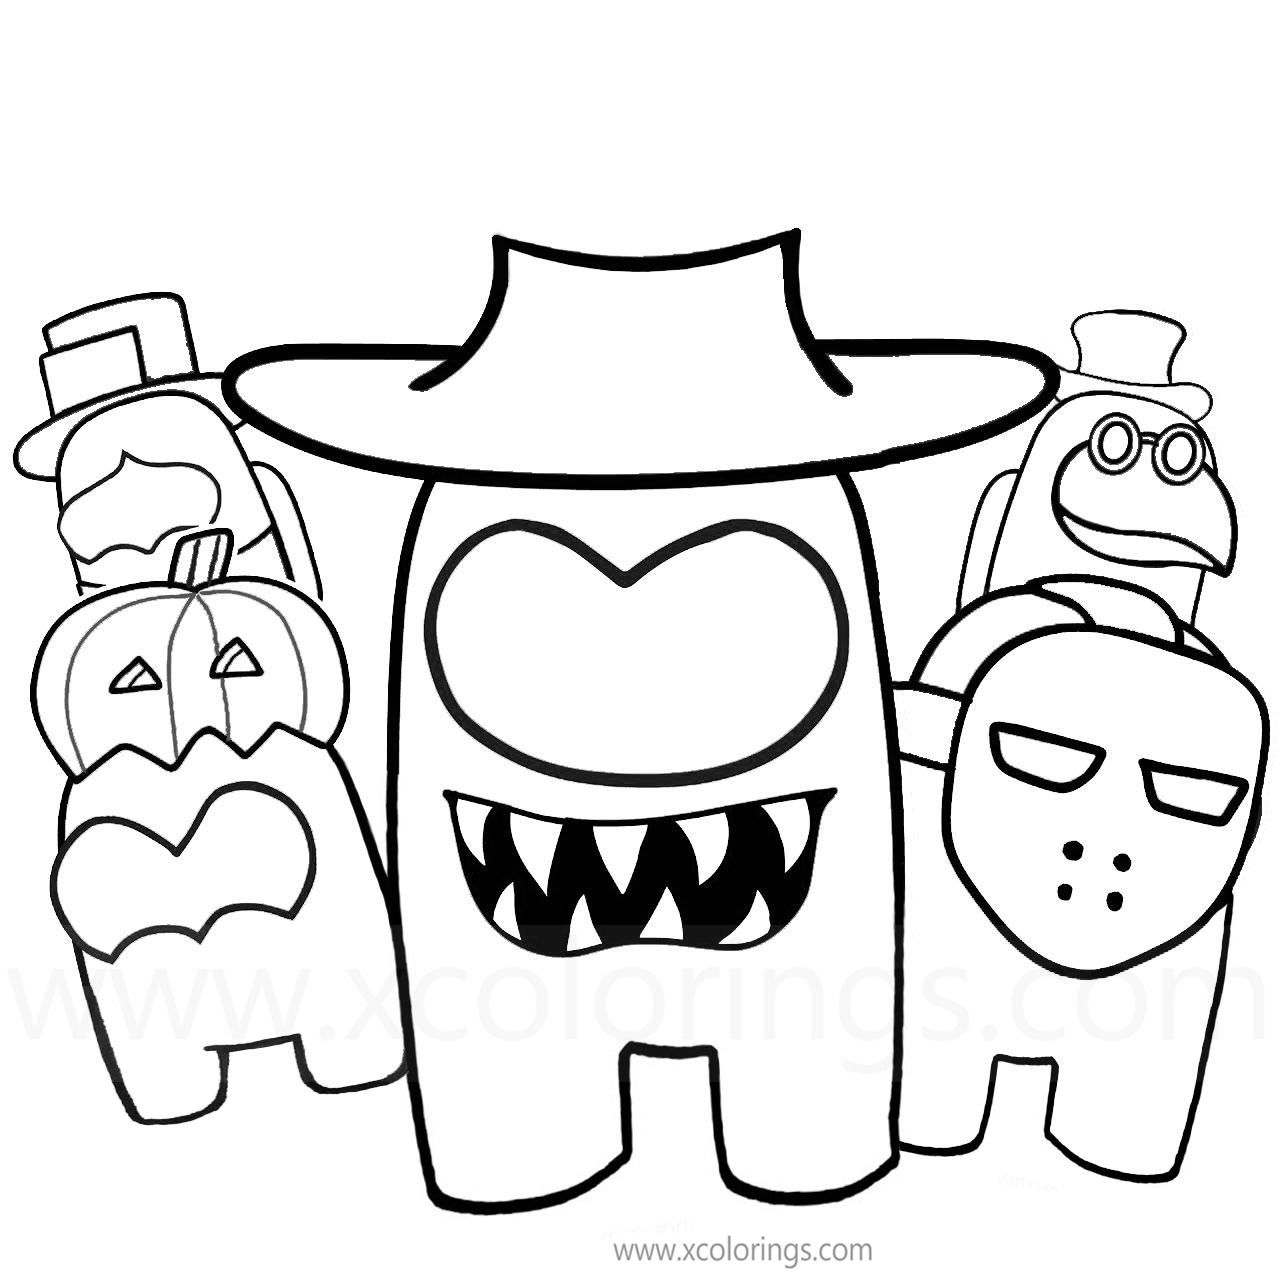 among us coloring pages impostor killing